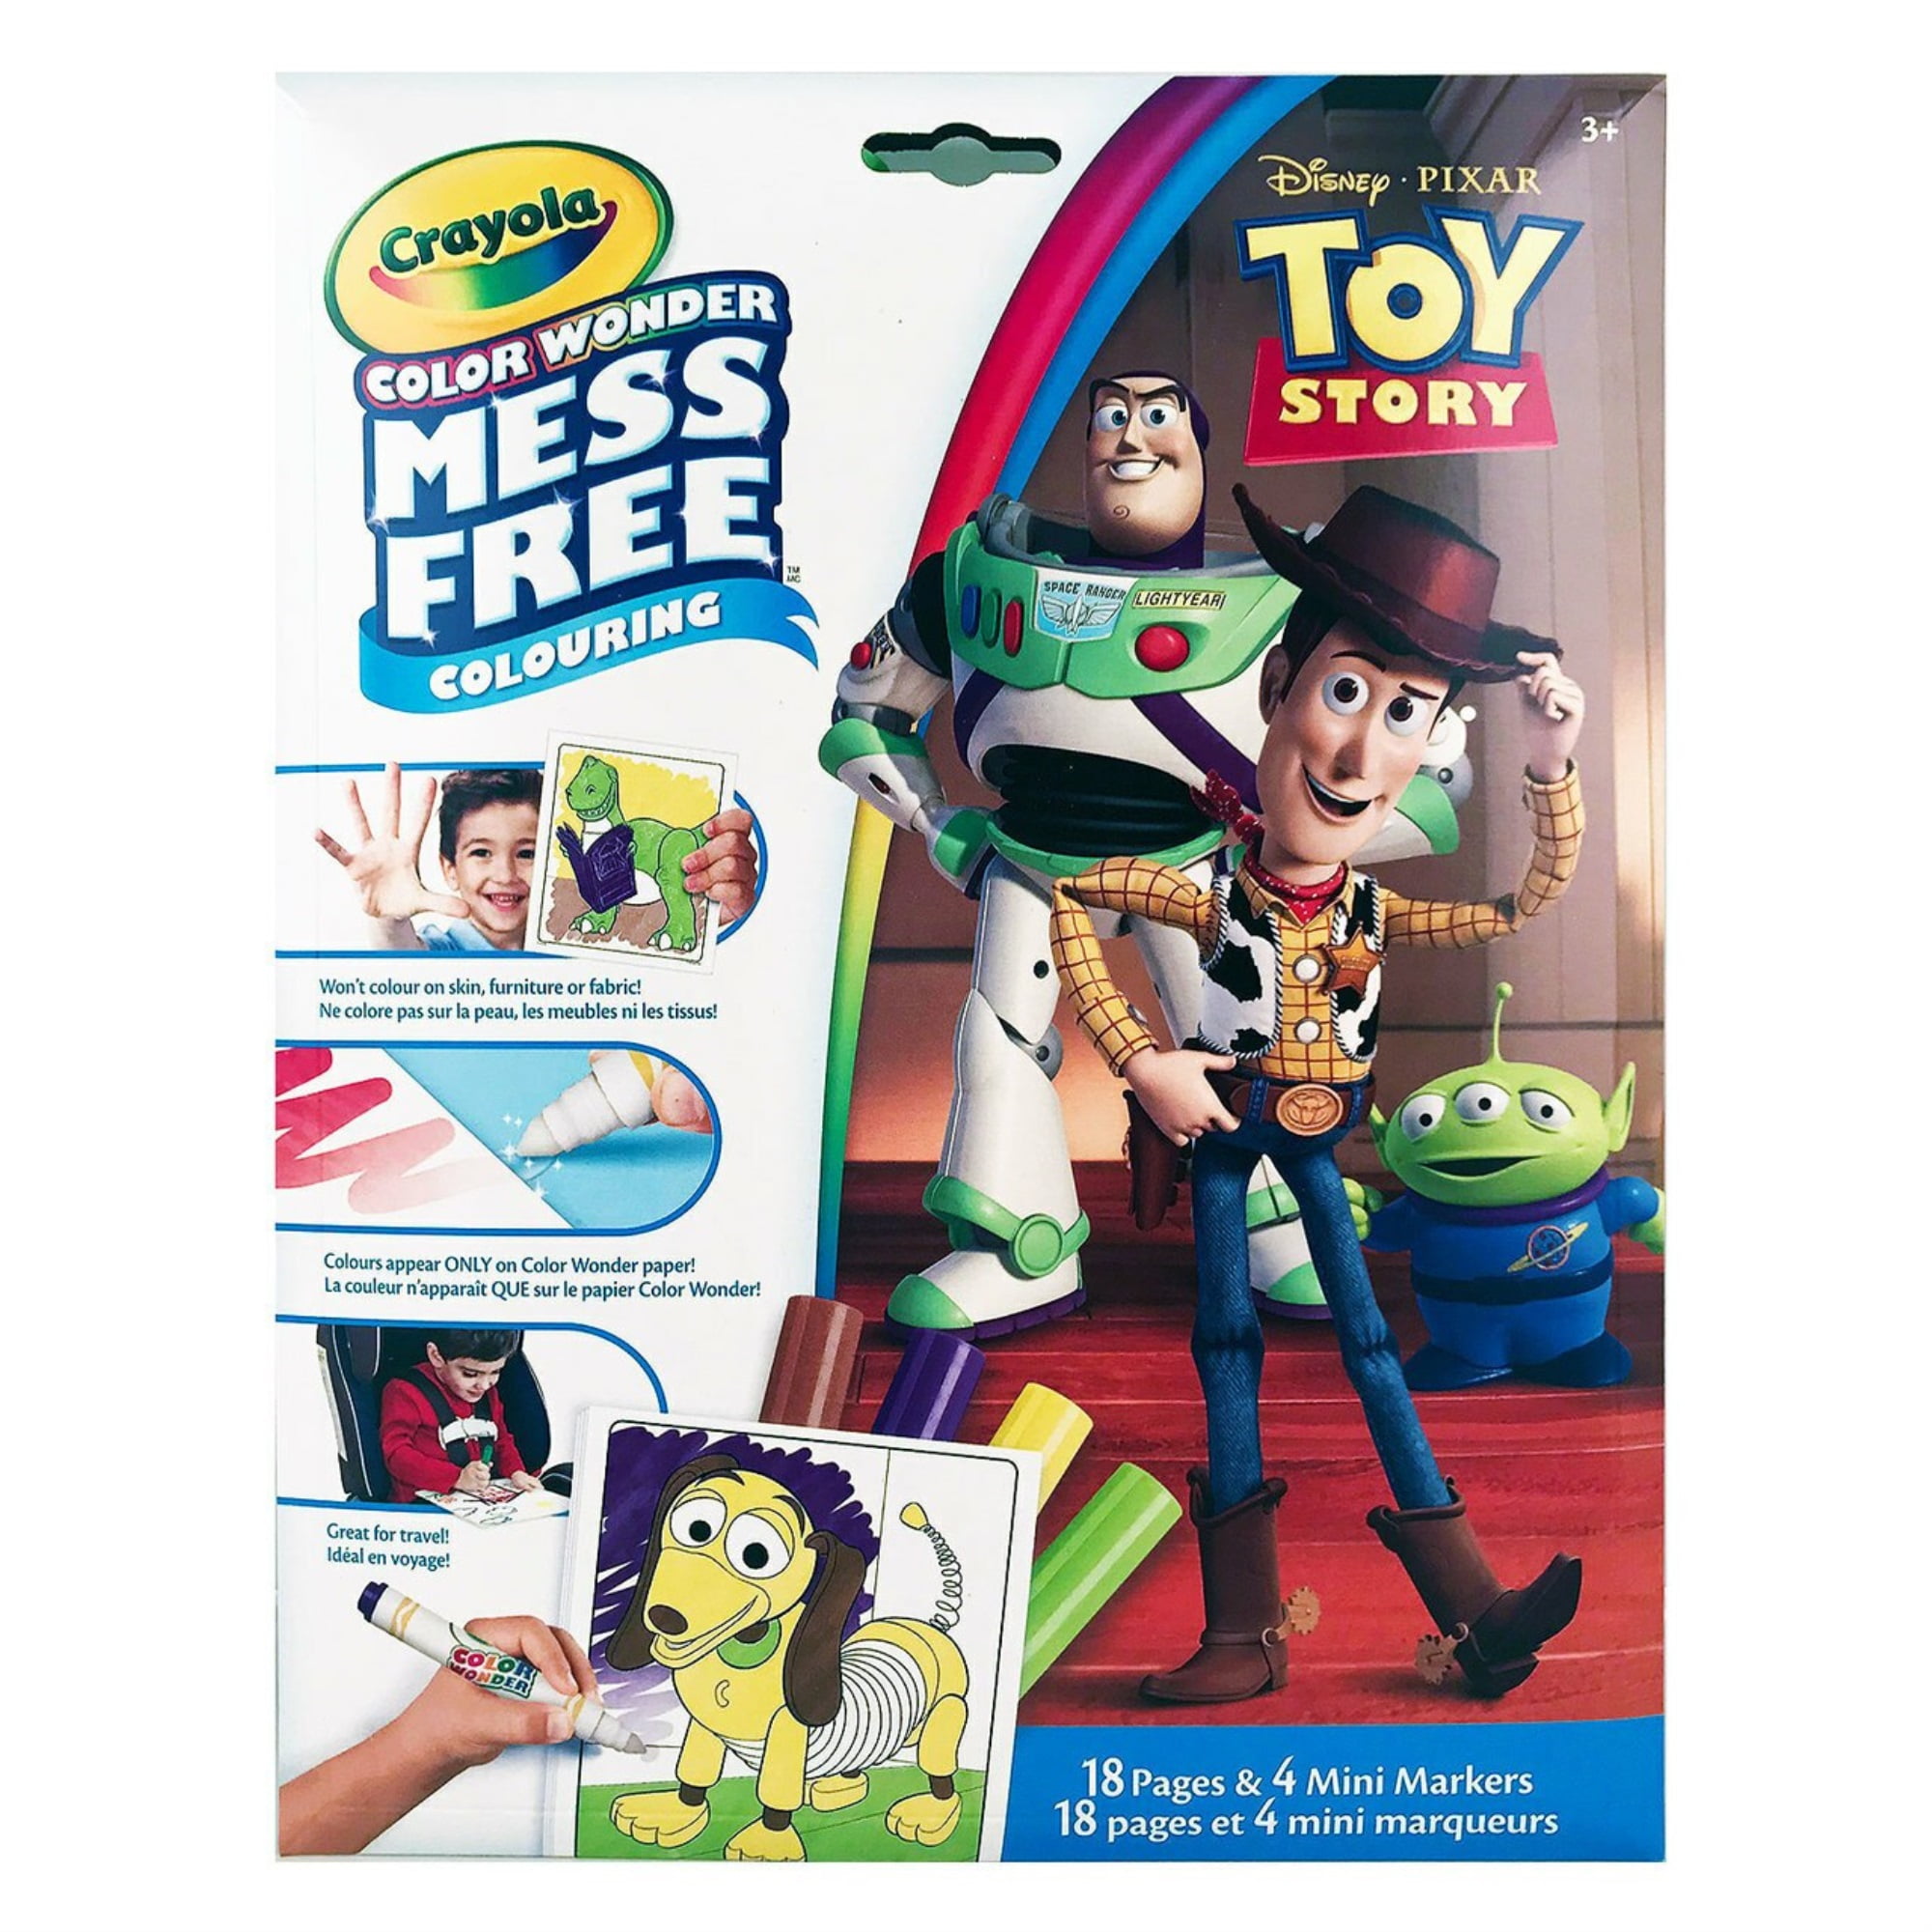 Crayola Color wonder Toy Story 4 Travel Easel With 30 pages markers and paints 